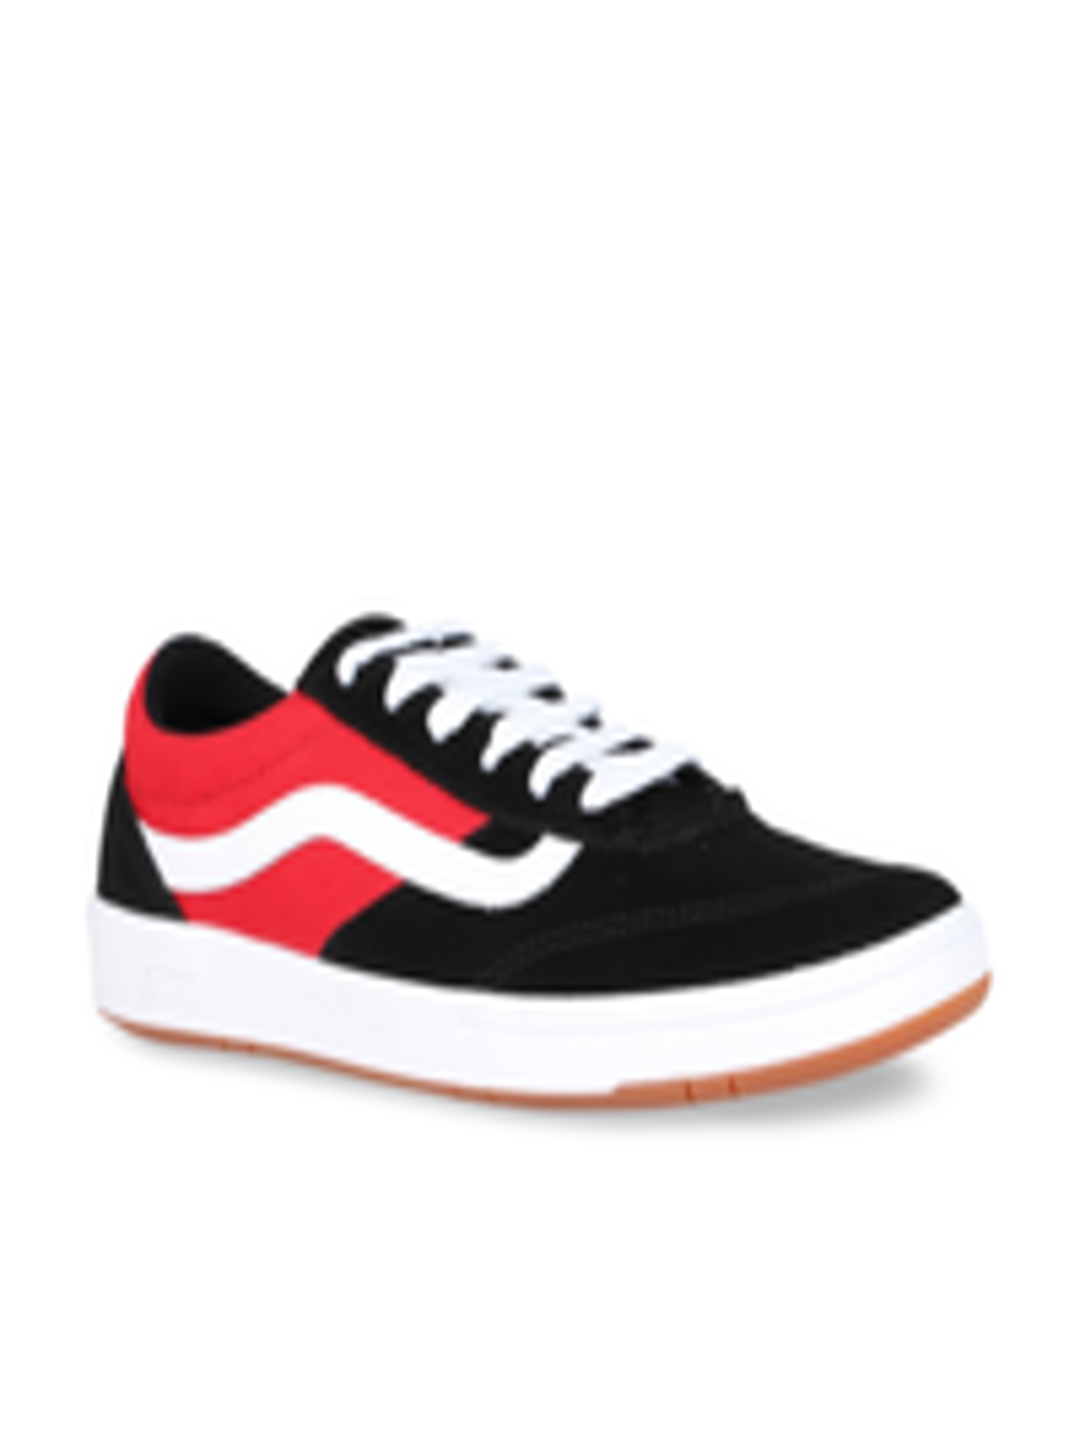 Buy Vans Unisex Black & Red Sneakers - Casual Shoes for Unisex 12295782